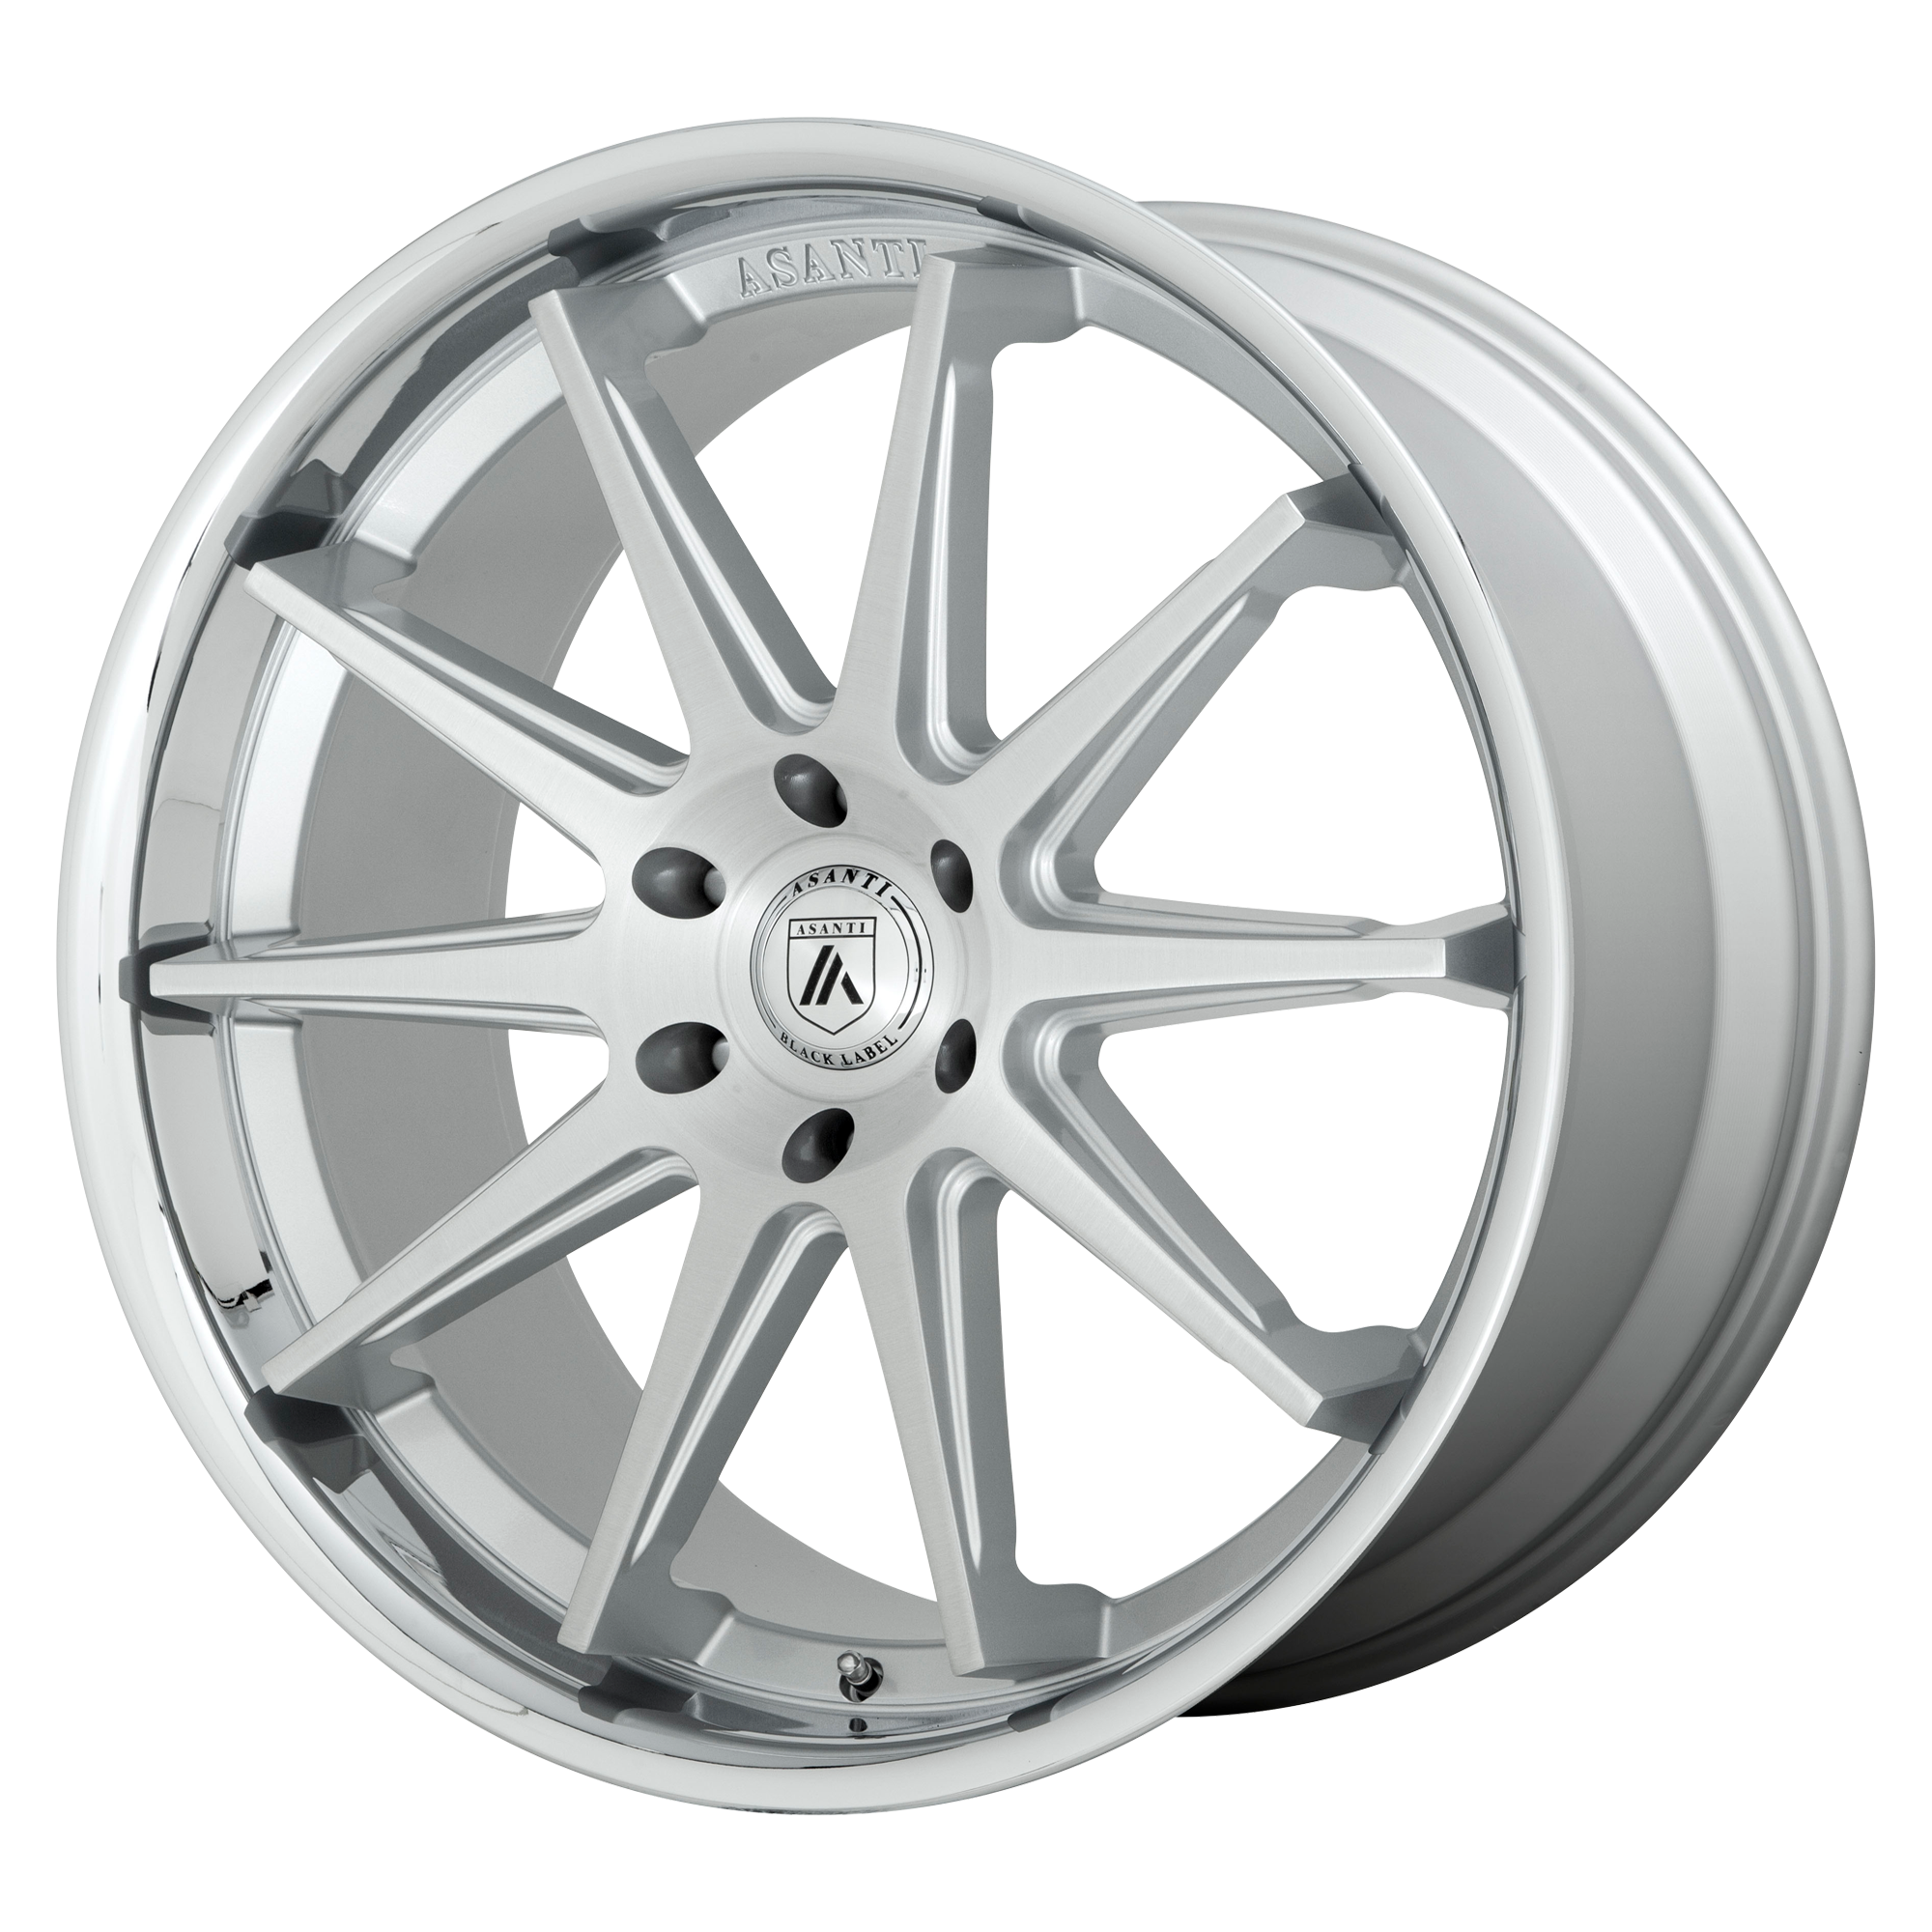 EMPEROR 24x10 6x135.00 BRUSHED SILVER W/ CHROME LIP (30 mm) - Tires and Engine Performance